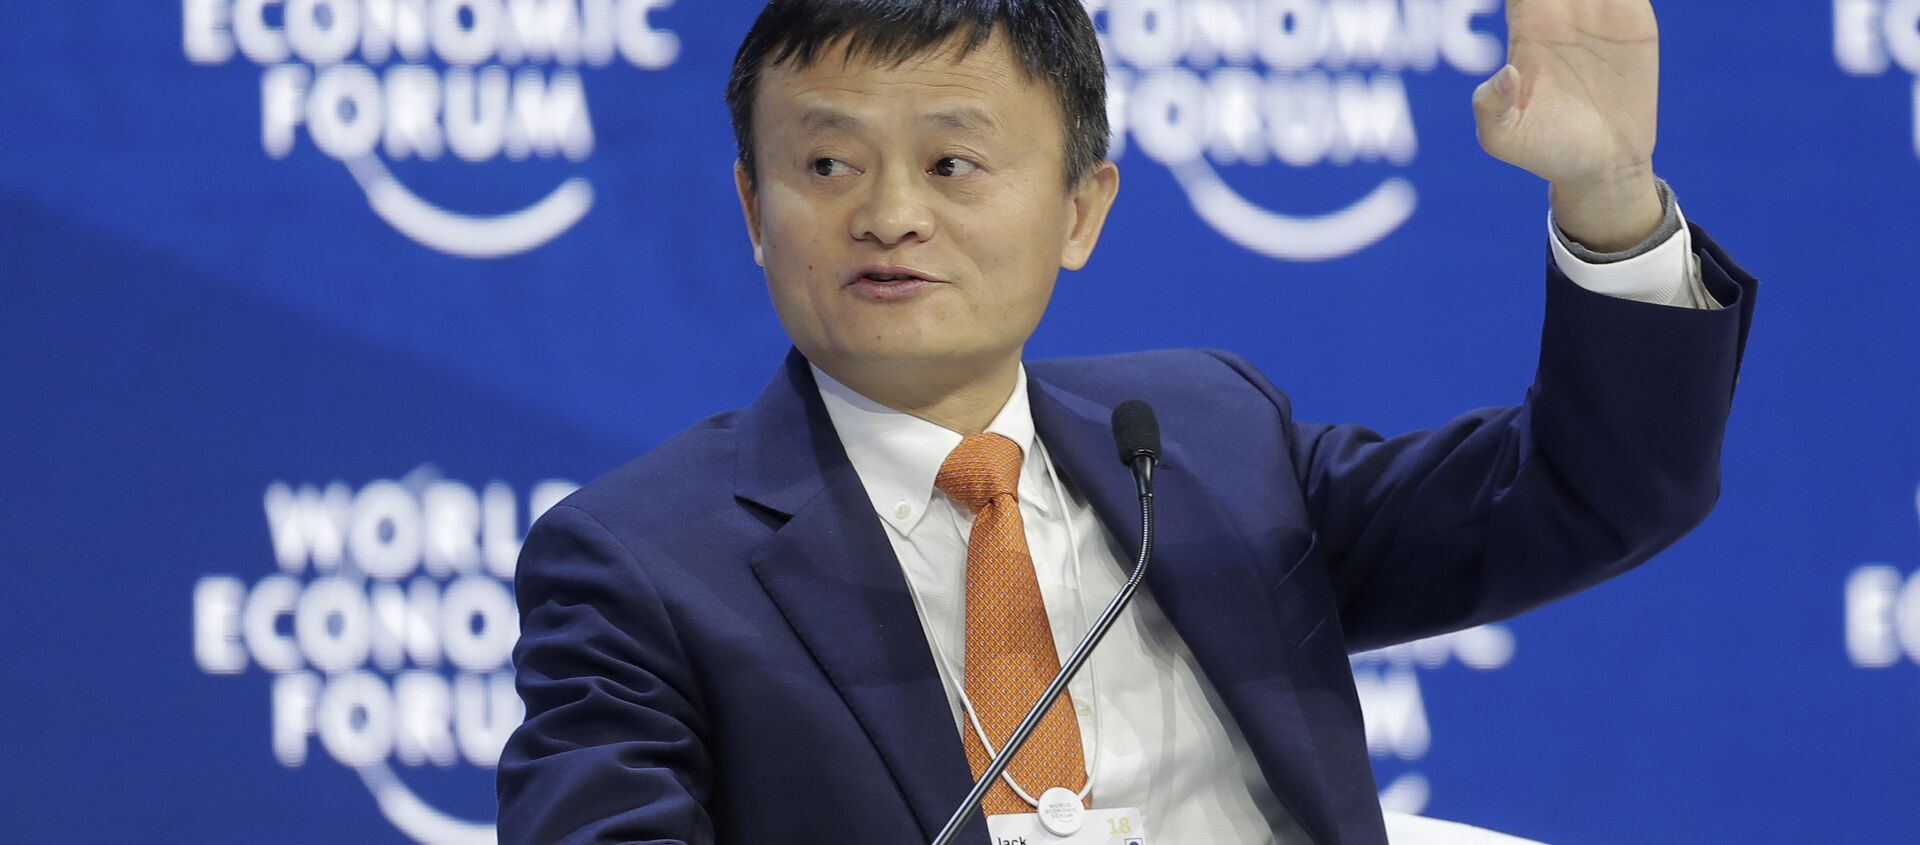 Alibaba founder Jack Ma speaks during the annual meeting of the World Economic Forum in Davos, Switzerland - Sputnik International, 1920, 20.01.2021